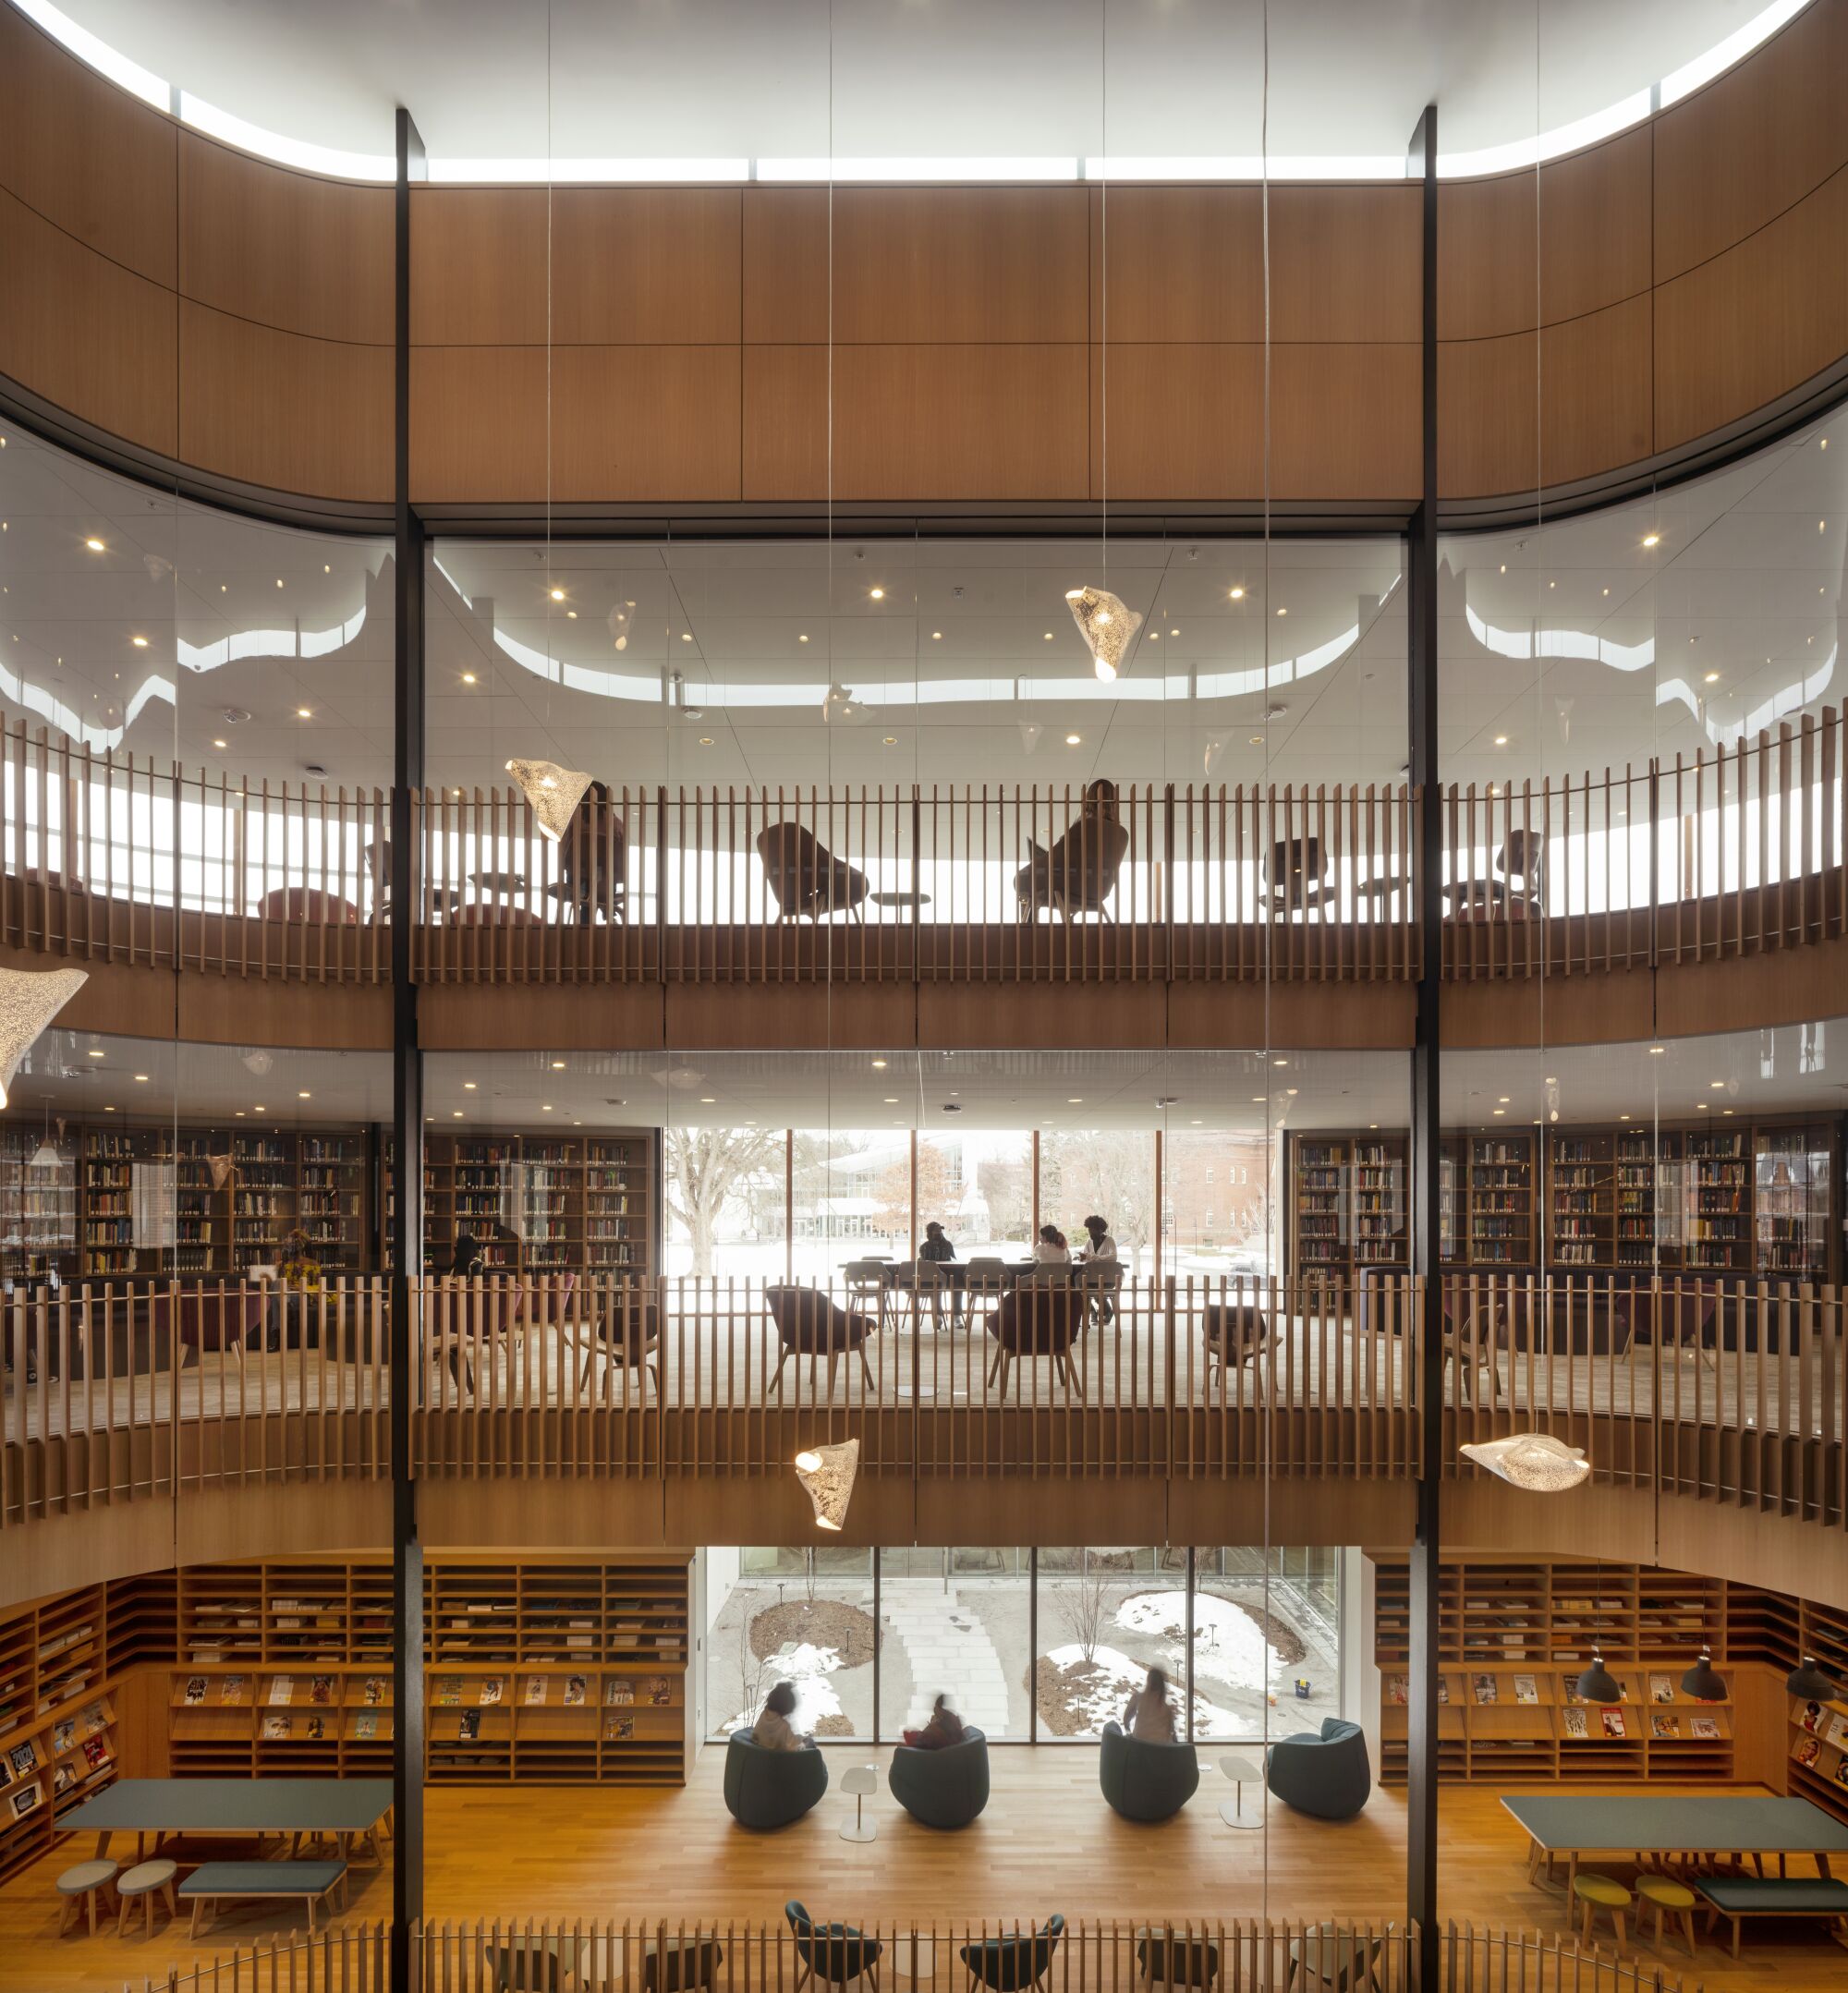 Three stories of wood-lined library rooms viewed from across an atrium.